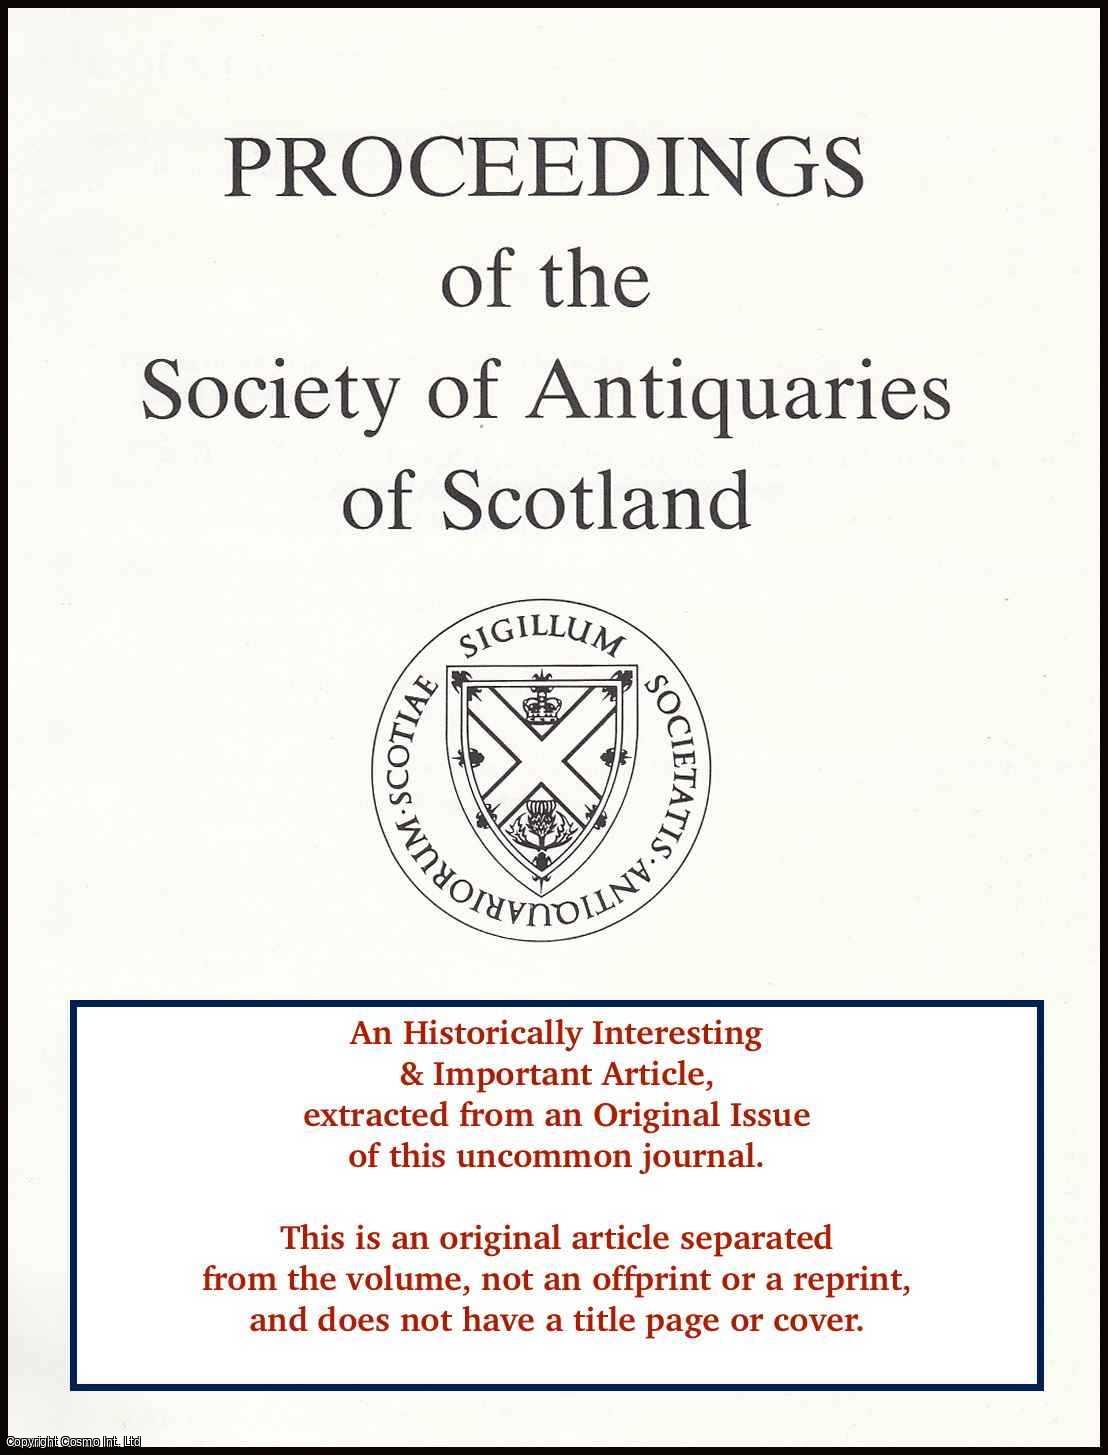 John Alexander Smith - The Discovery of a Massive Silver Chain of Plain Double Rings or Links at Hordwell, Berwickshire. By The Hon. Lord Dunglas. With Notes of Similar Silver Chains Found in Scotland. An original article from the Proceedings of the Society of Antiquaries of Scotland, 1880.